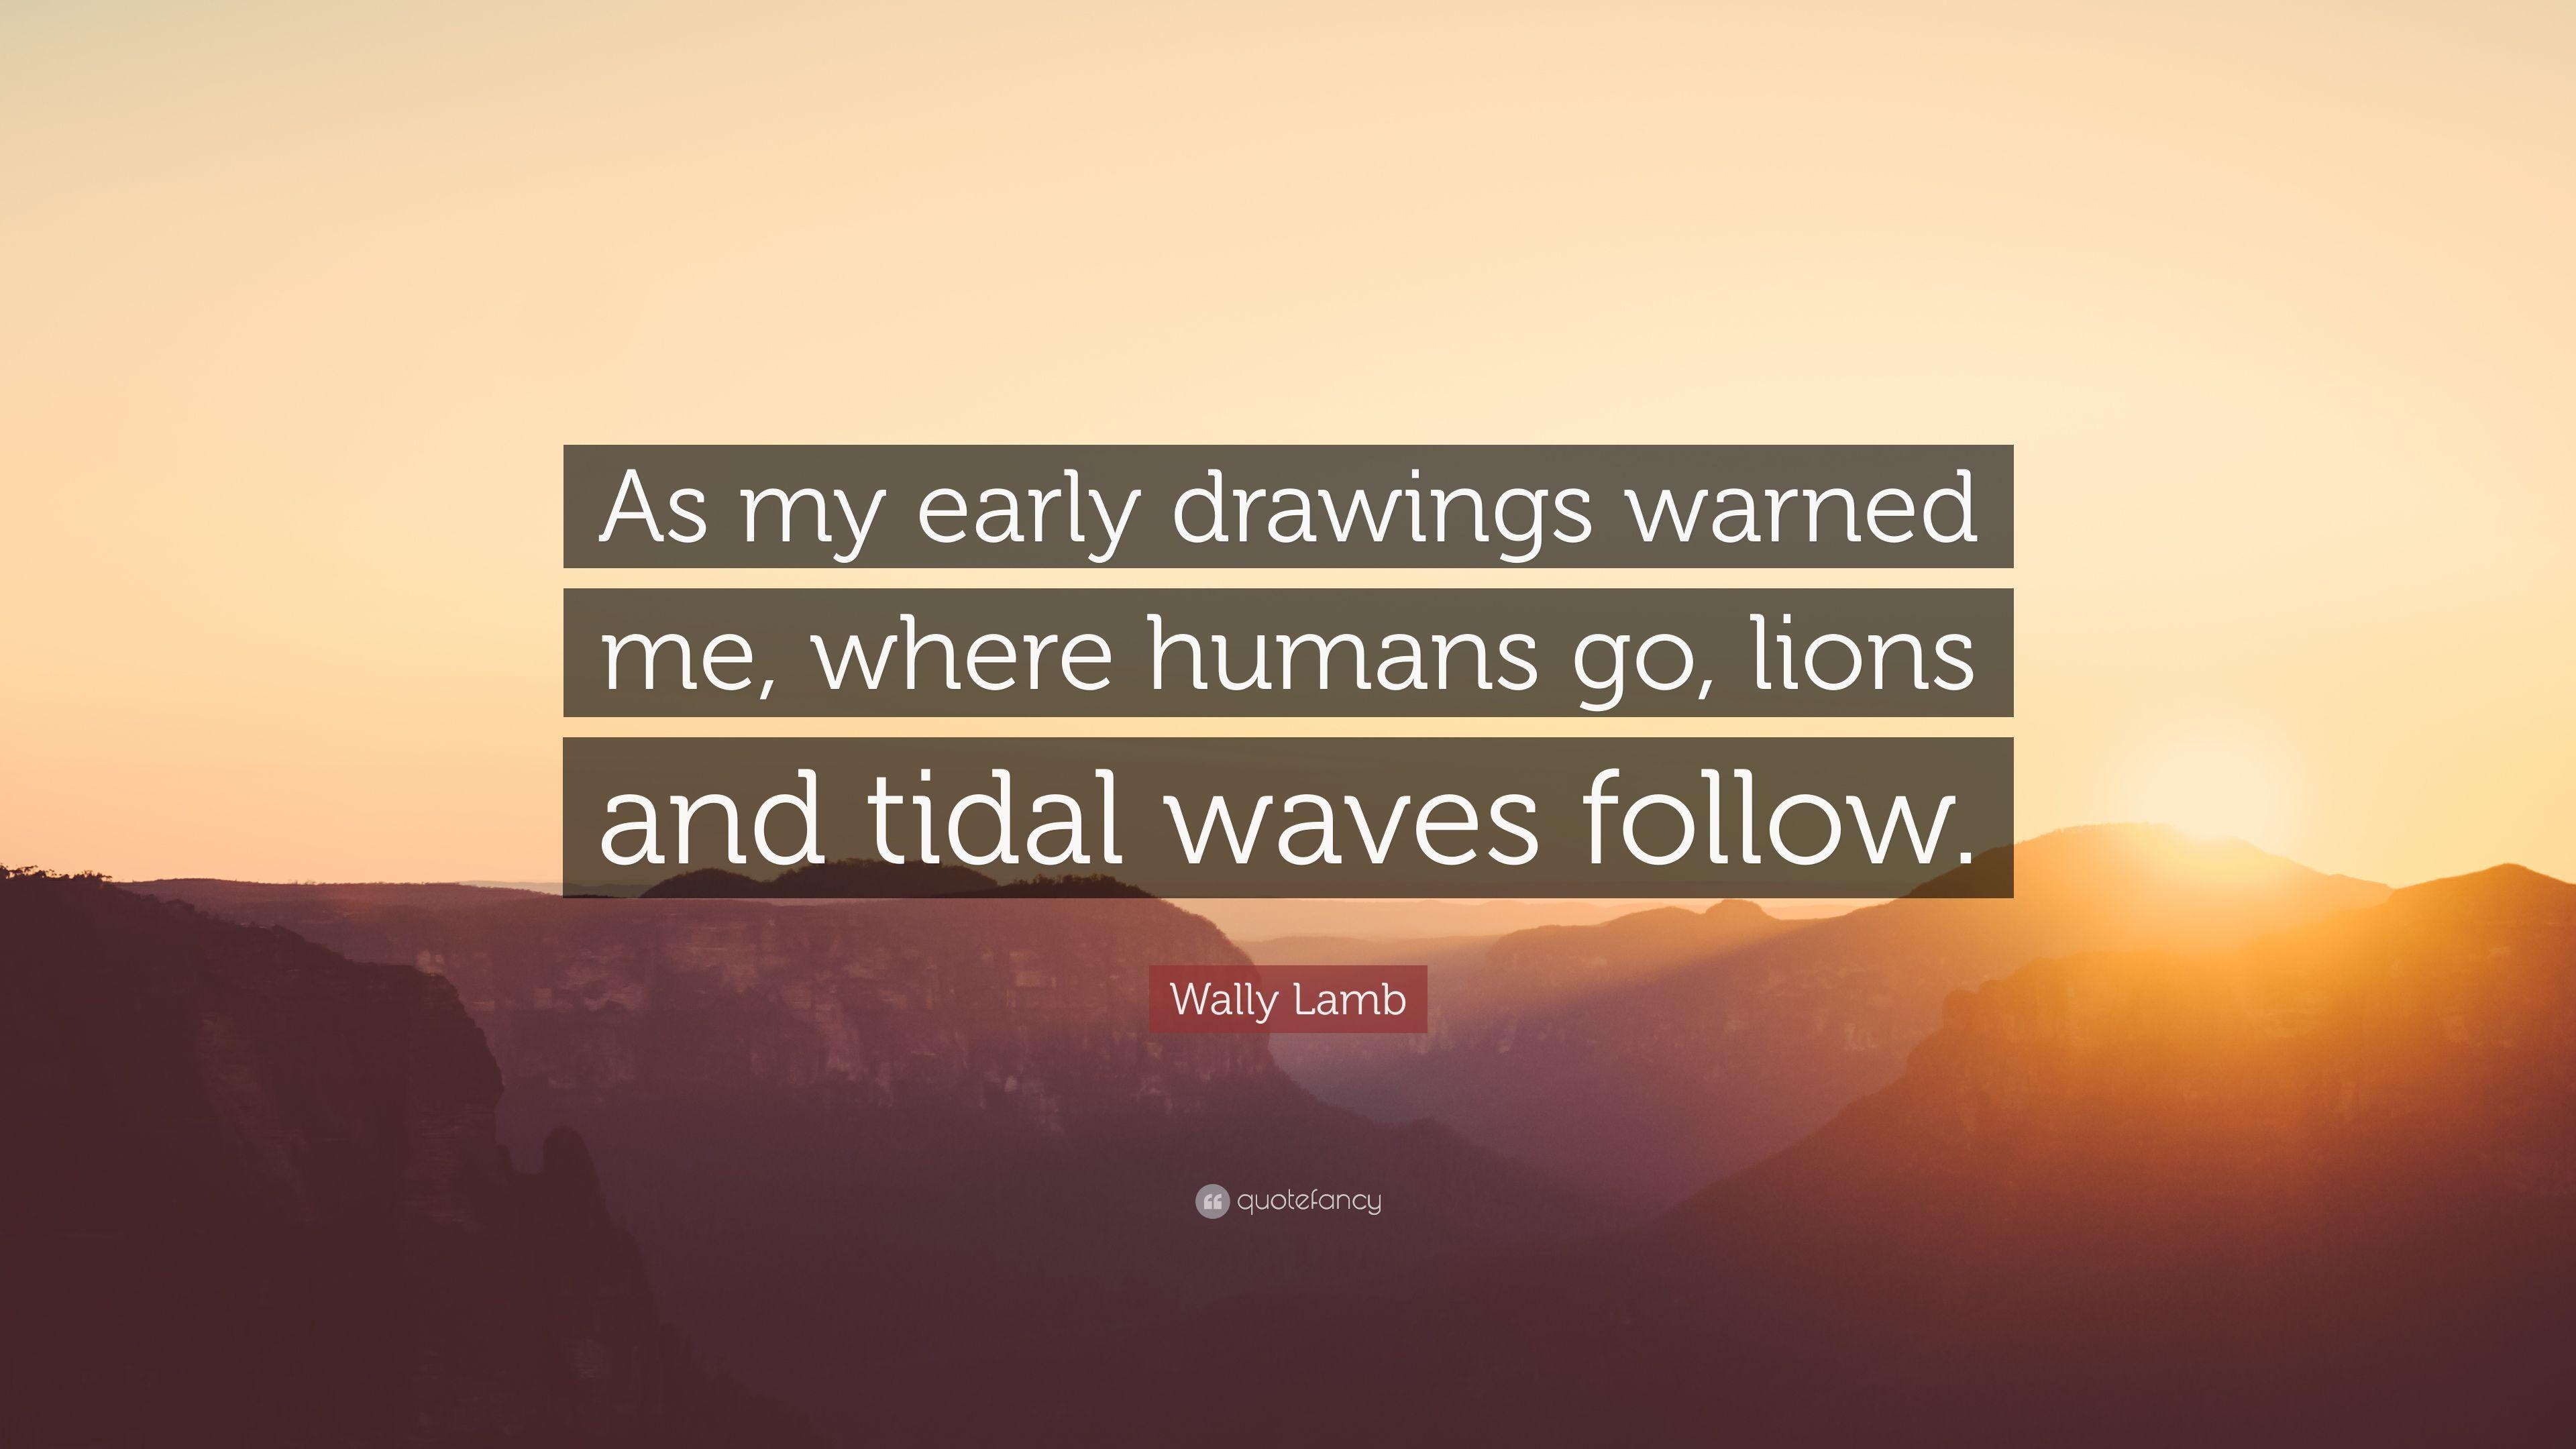 Wally Lamb Quote: “As my early drawings warned me, where humans go